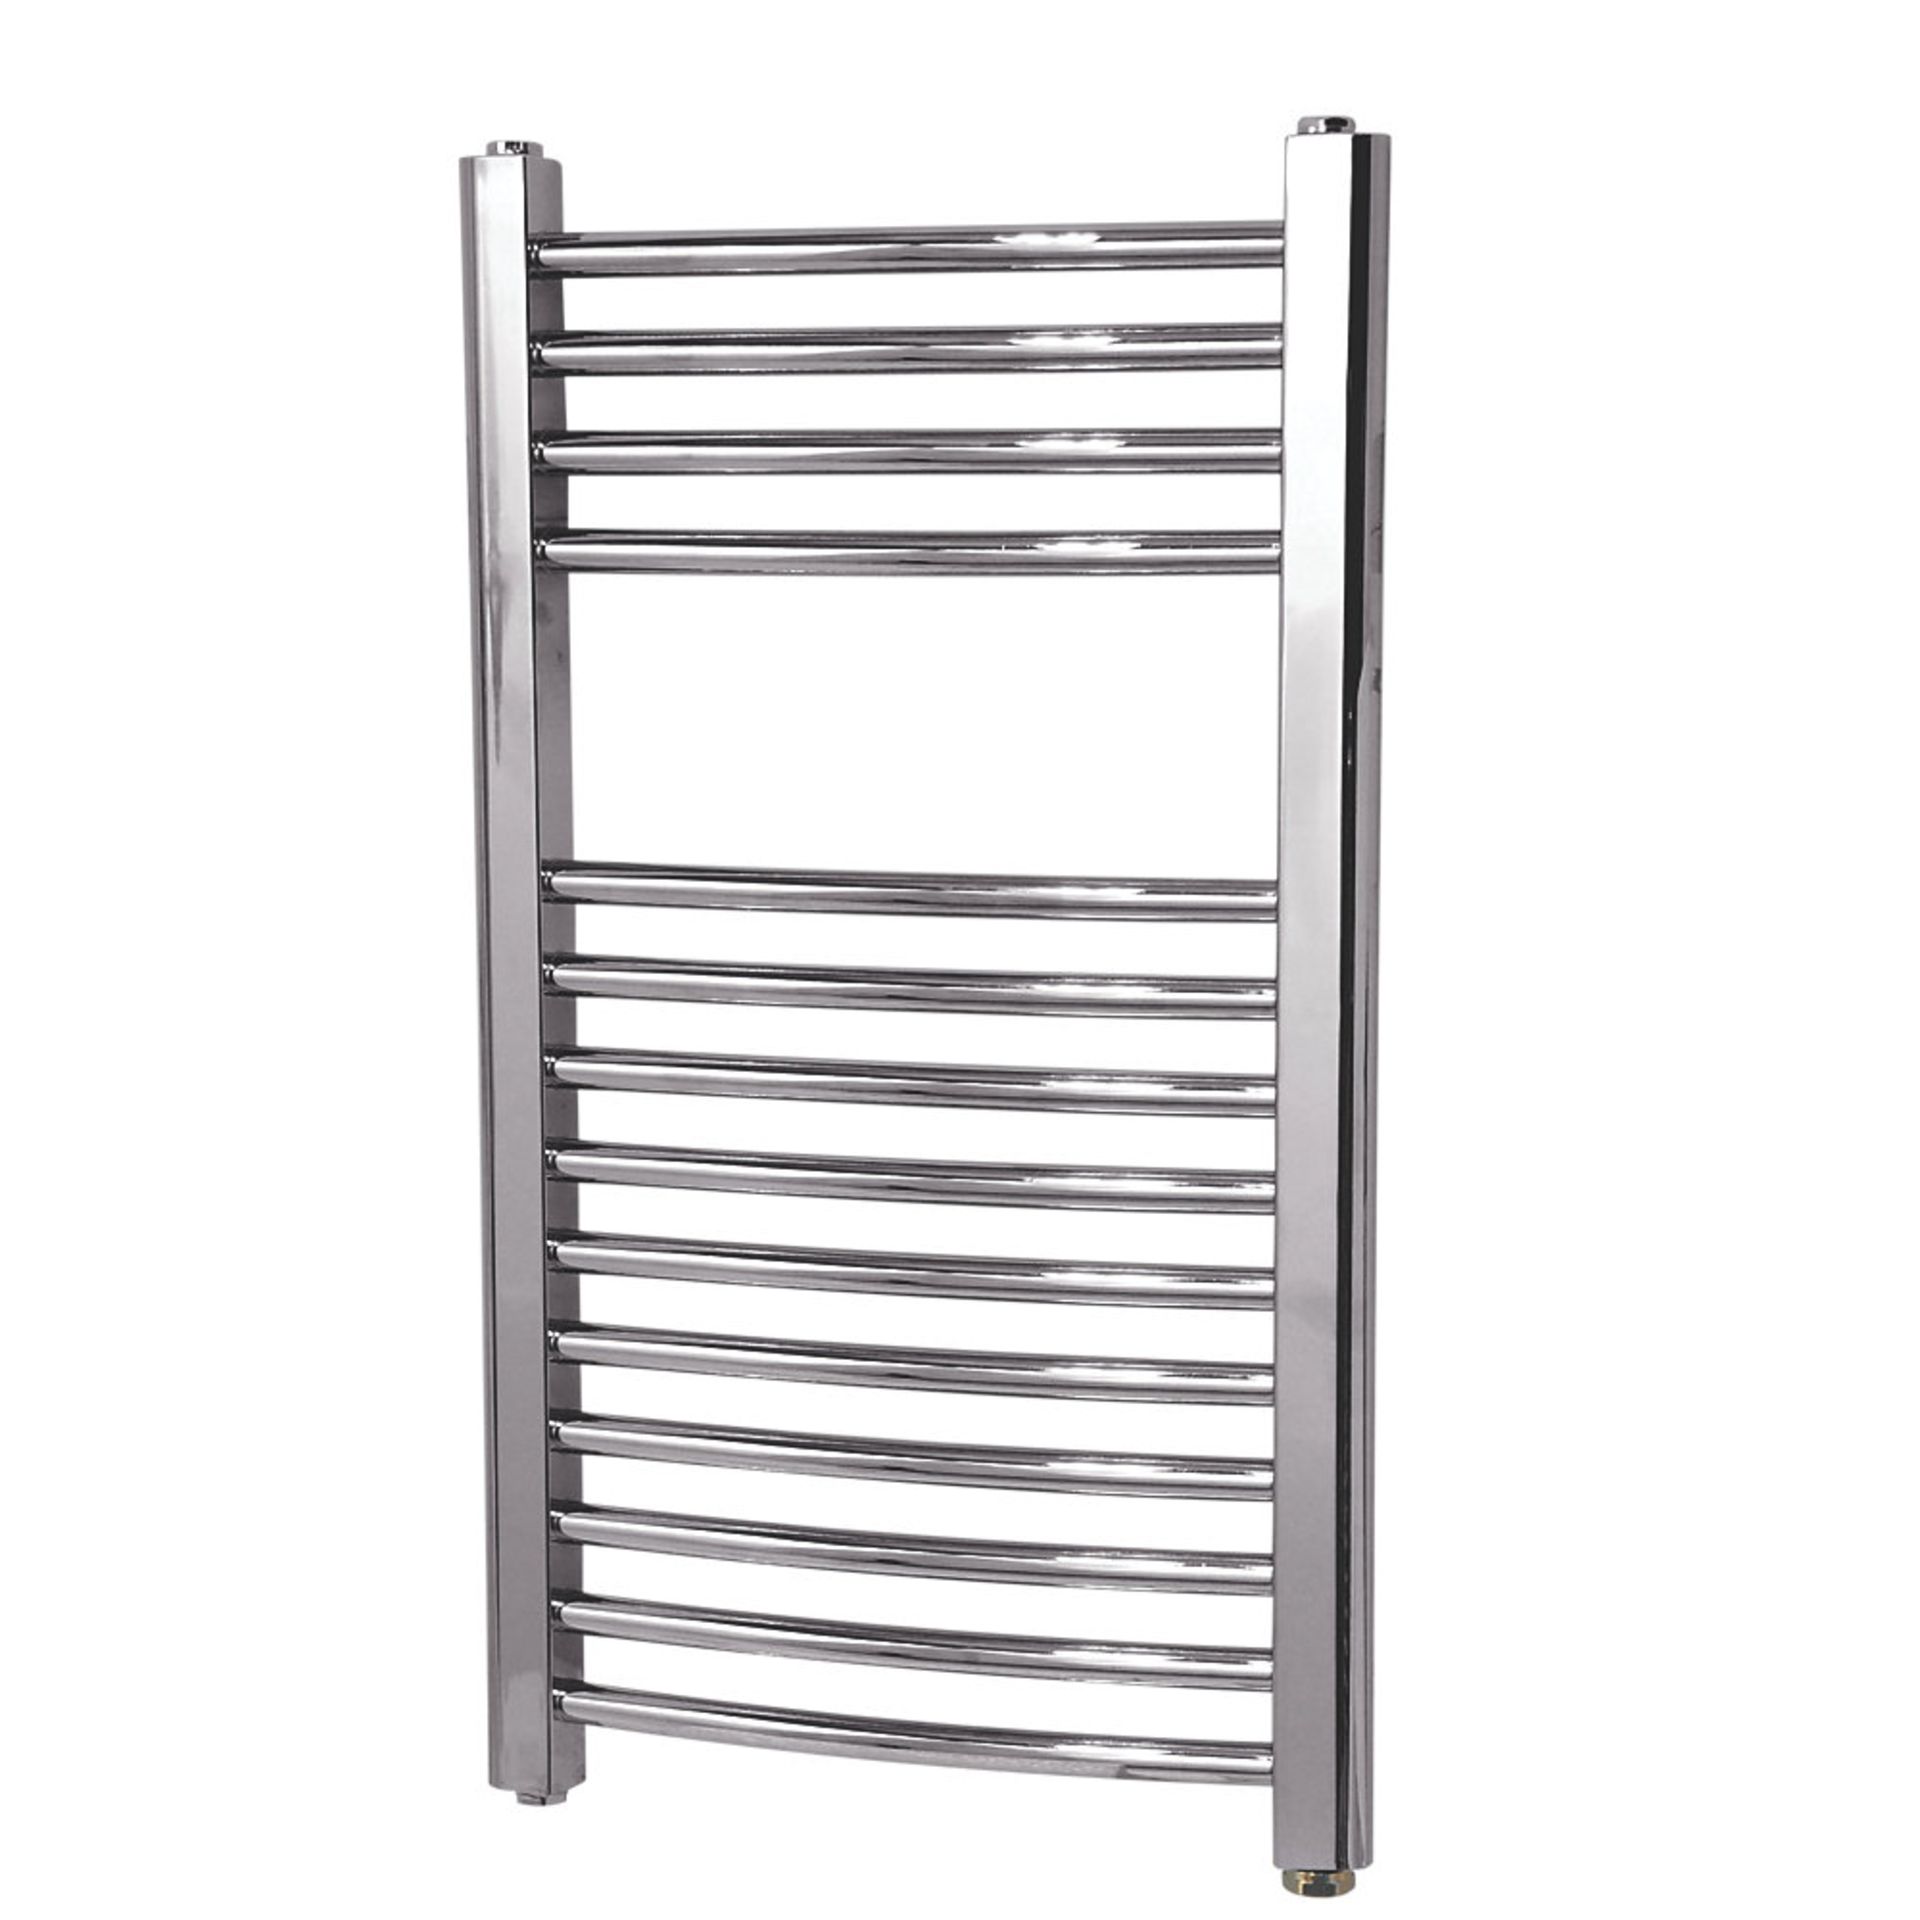 (UK181) 600x812mm White Double Panel Horizontal Colosseum Traditional Radiator. RRP £376.99. Made - Image 2 of 3